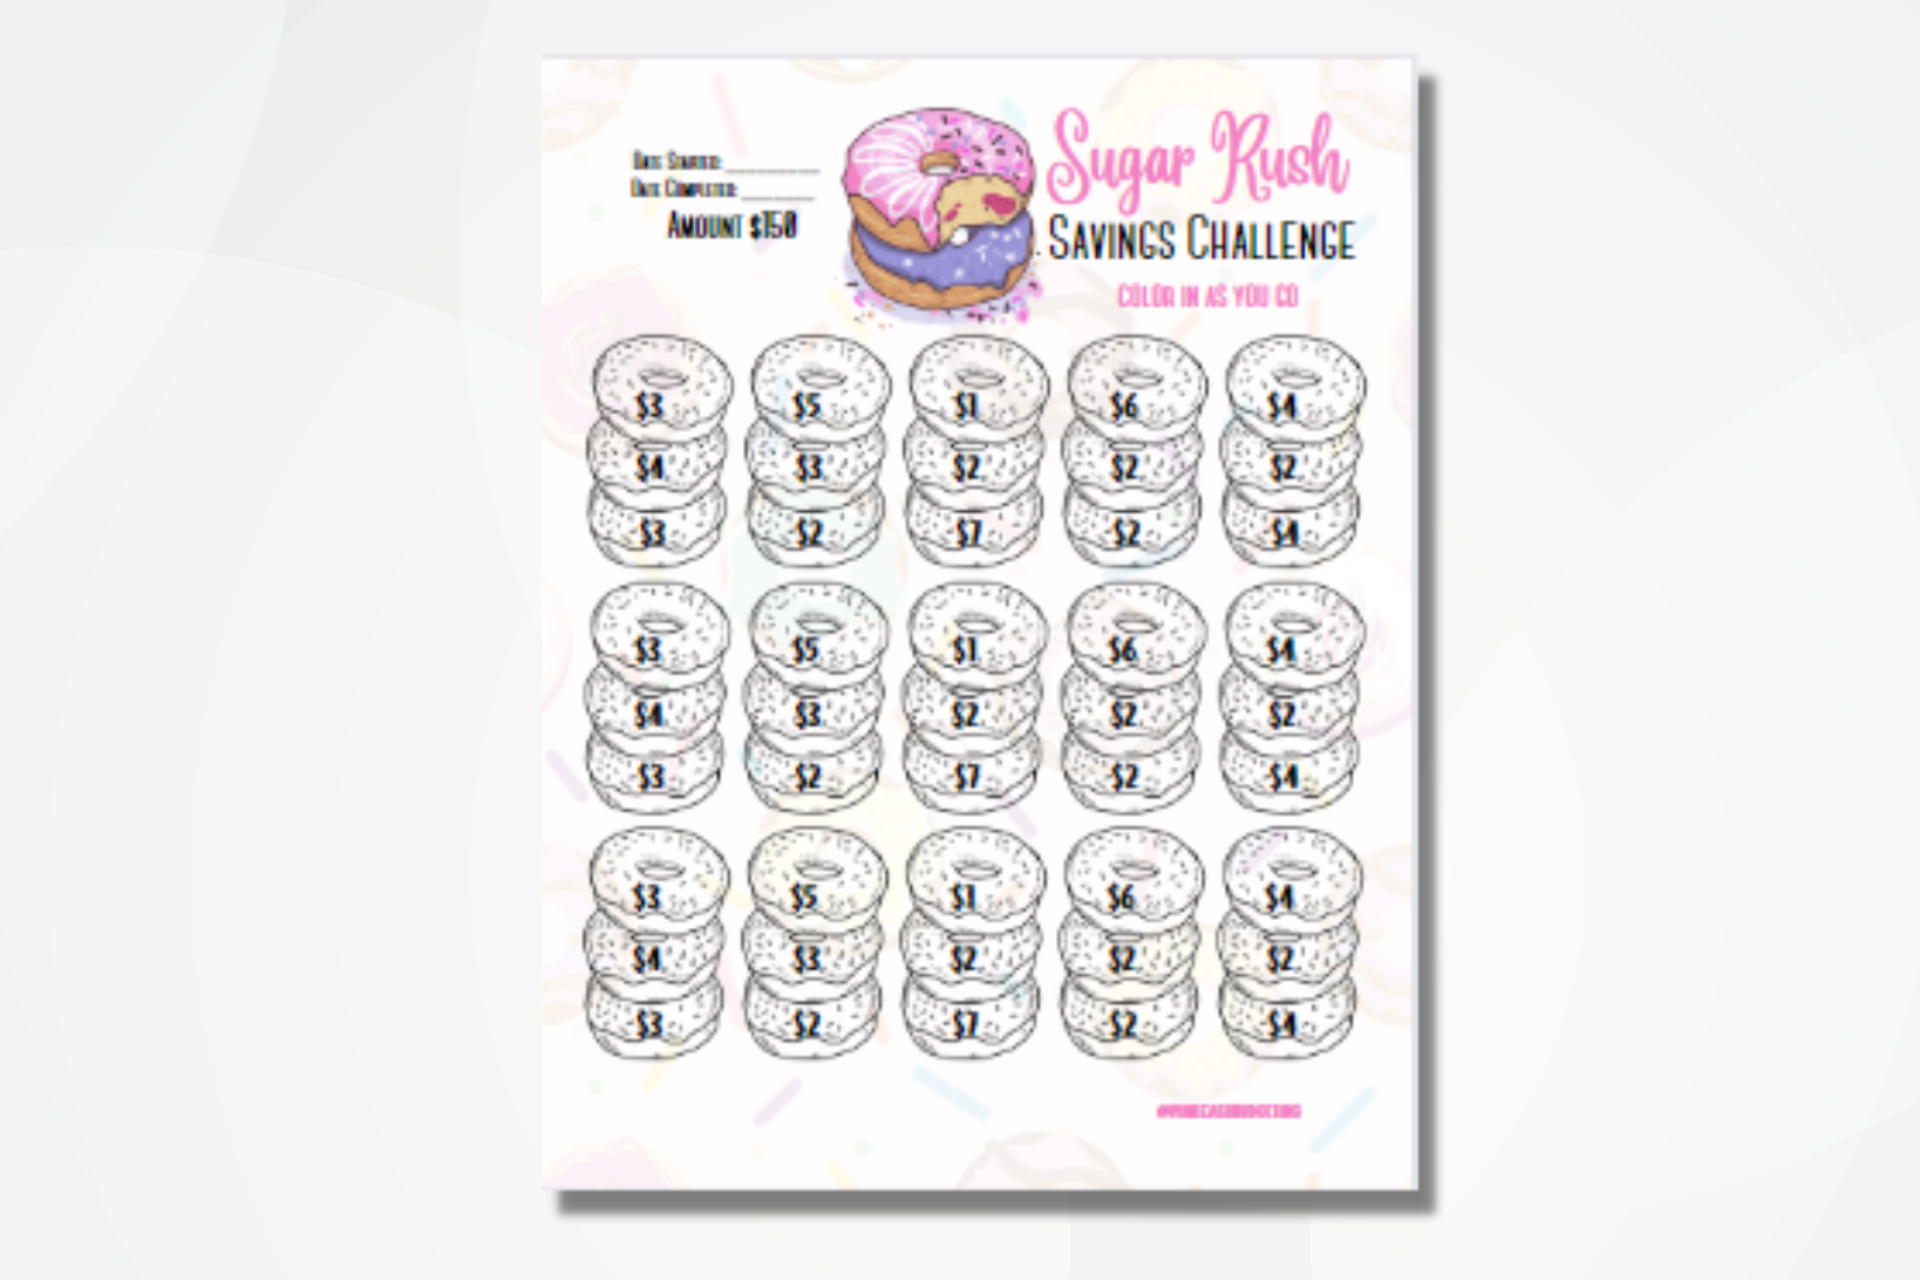 Instantly Download the Sugar Rush Savings Challenge and Start Saving Now